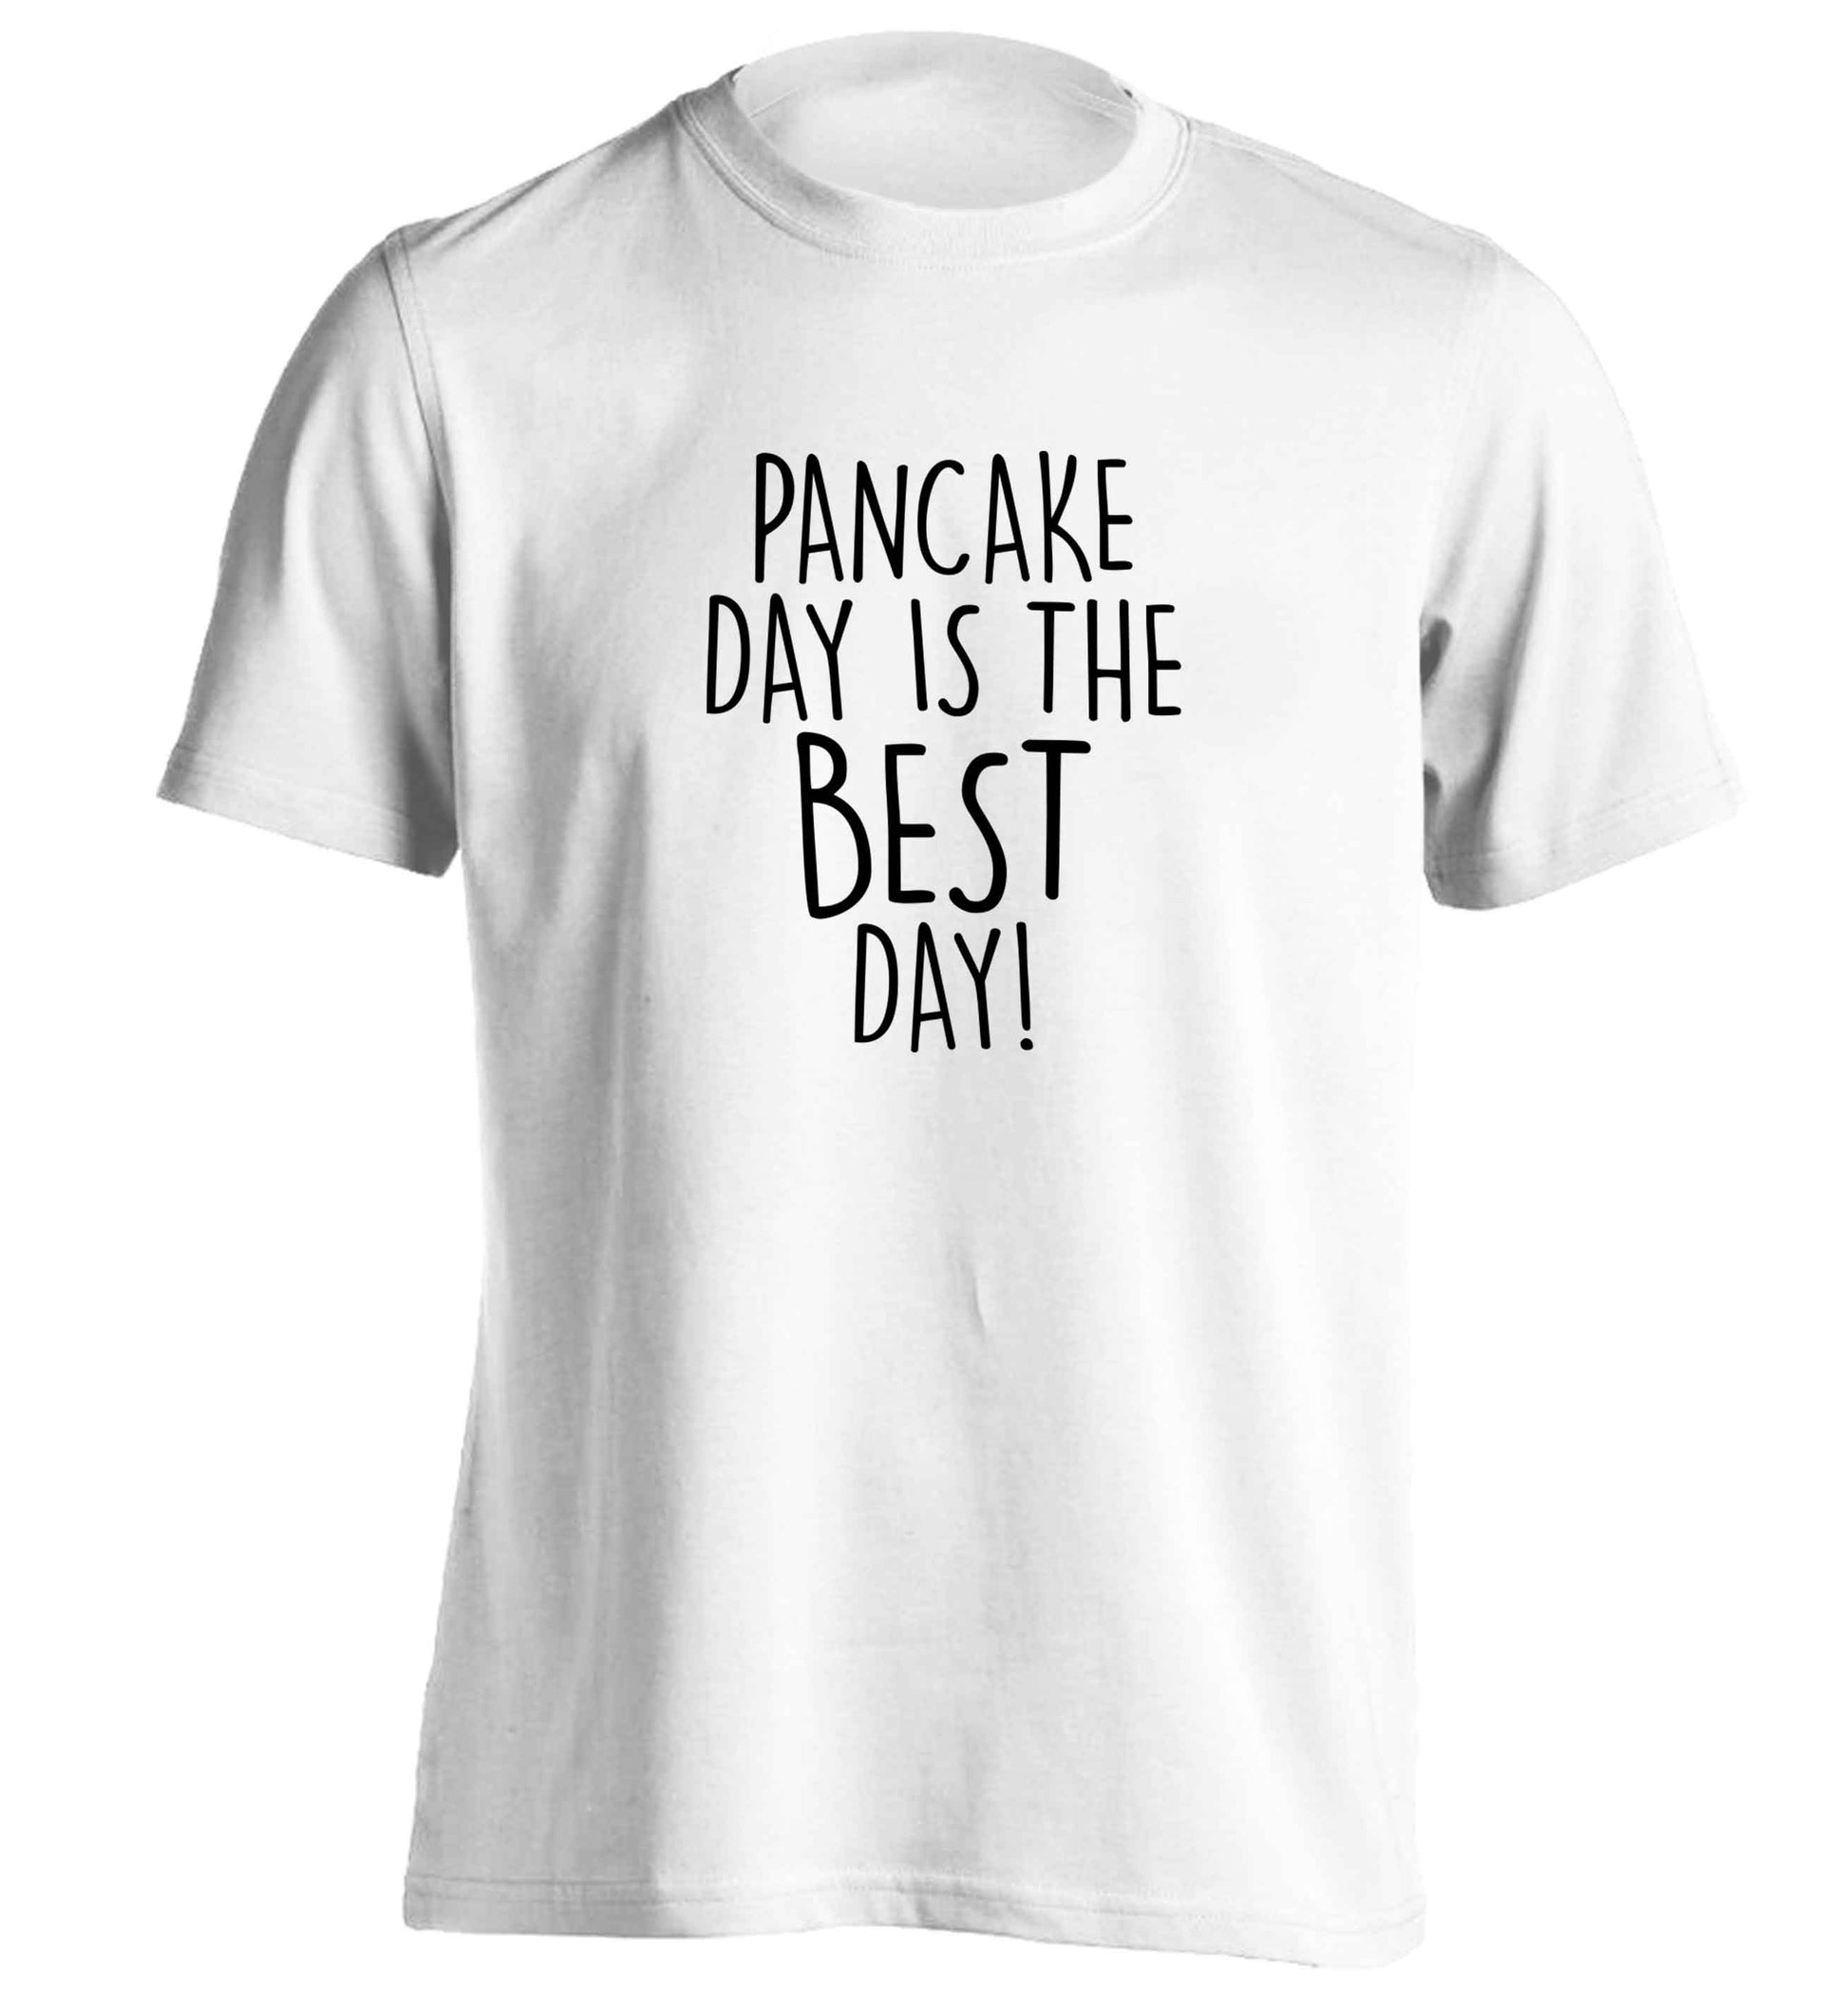 Pancake day is the best day adults unisex white Tshirt 2XL